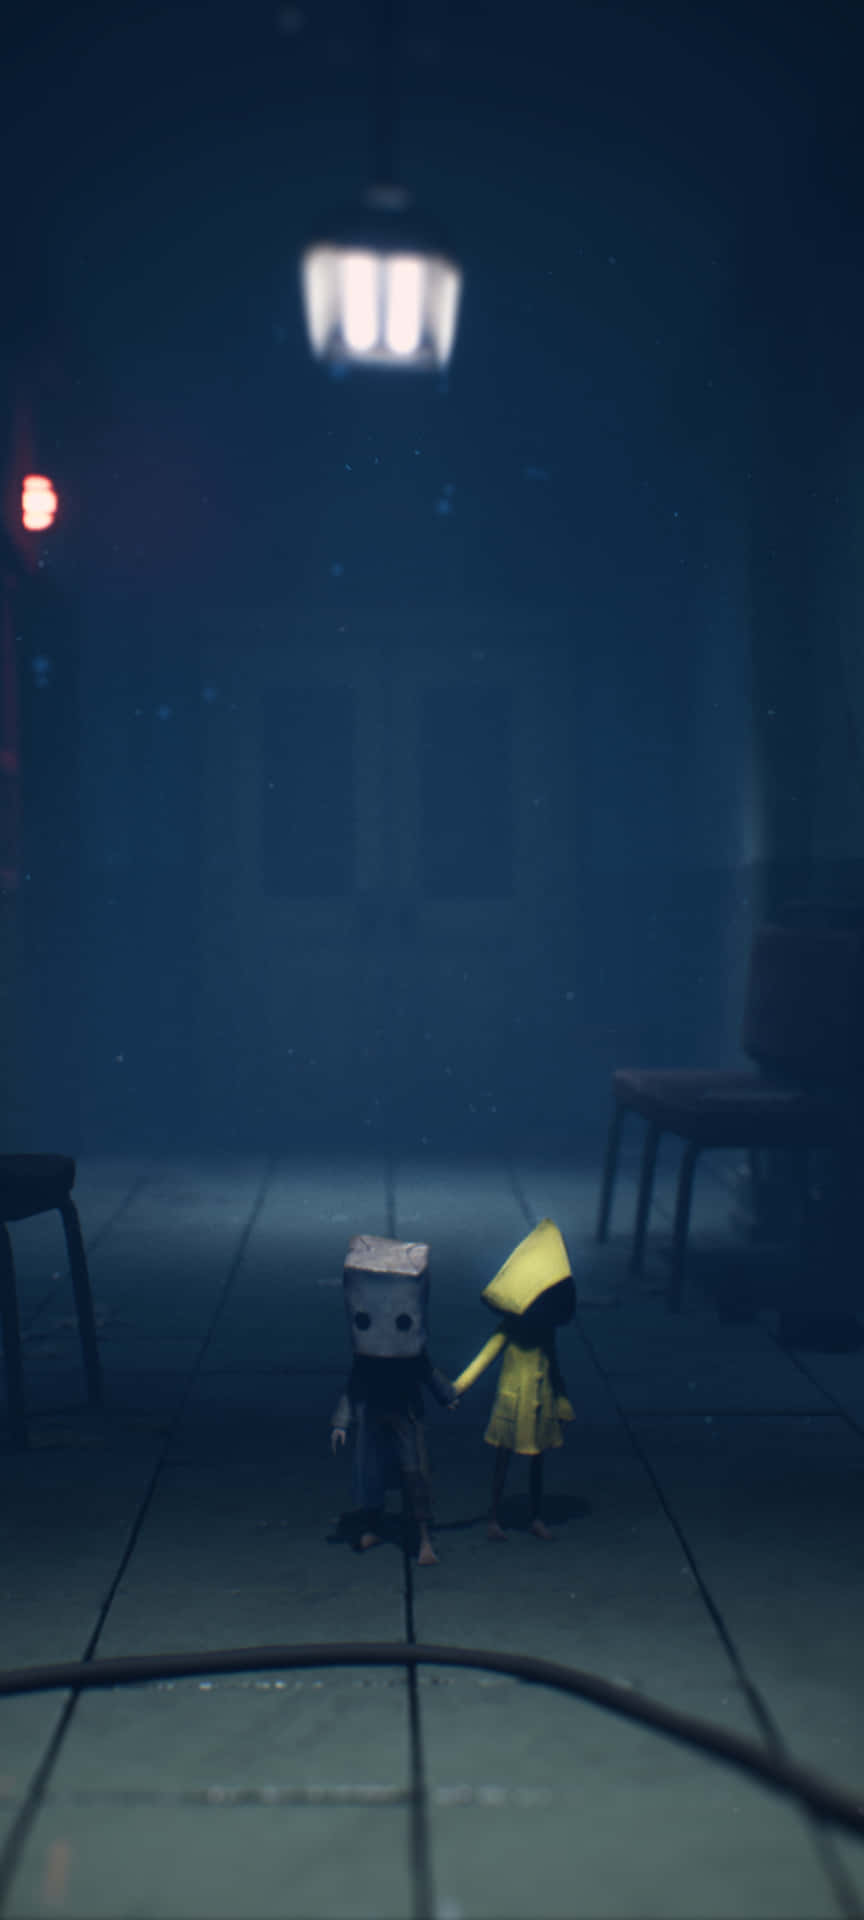 Dive into the dark and mysterious world of Little Nightmares Wallpaper